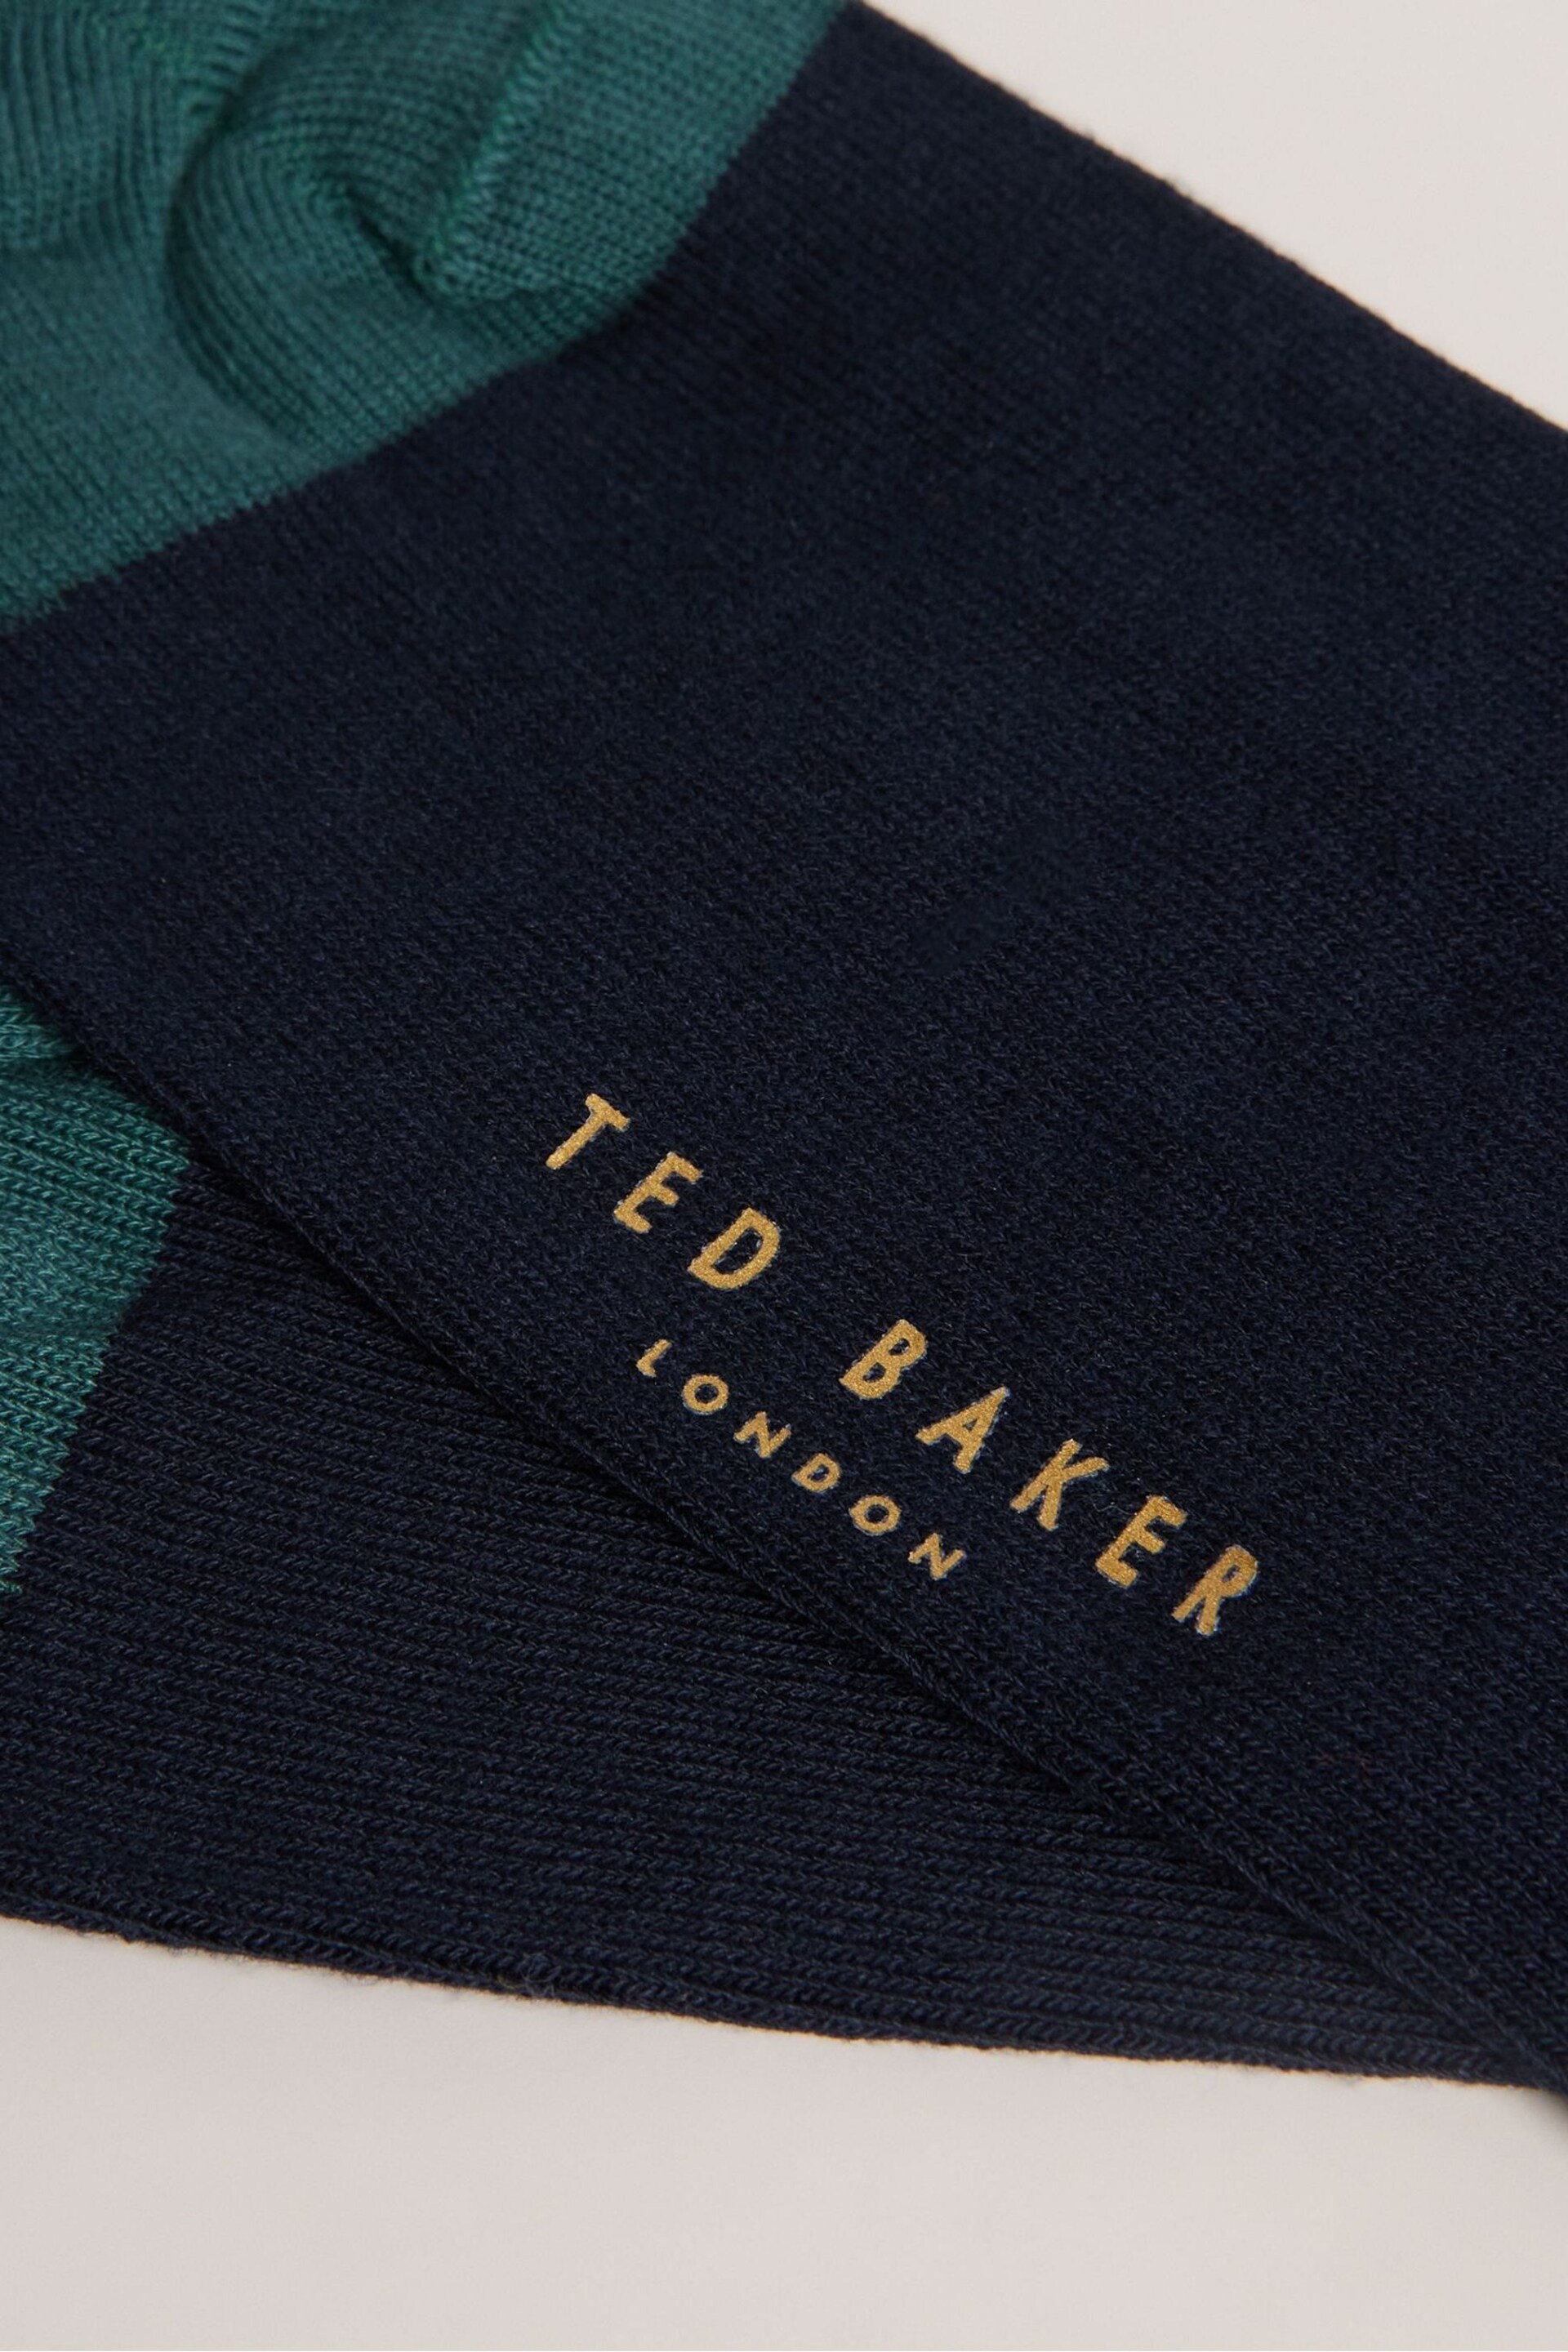 Ted Baker Blue Corecol Socks With Contrast Colour Heel And Toe - Image 3 of 3